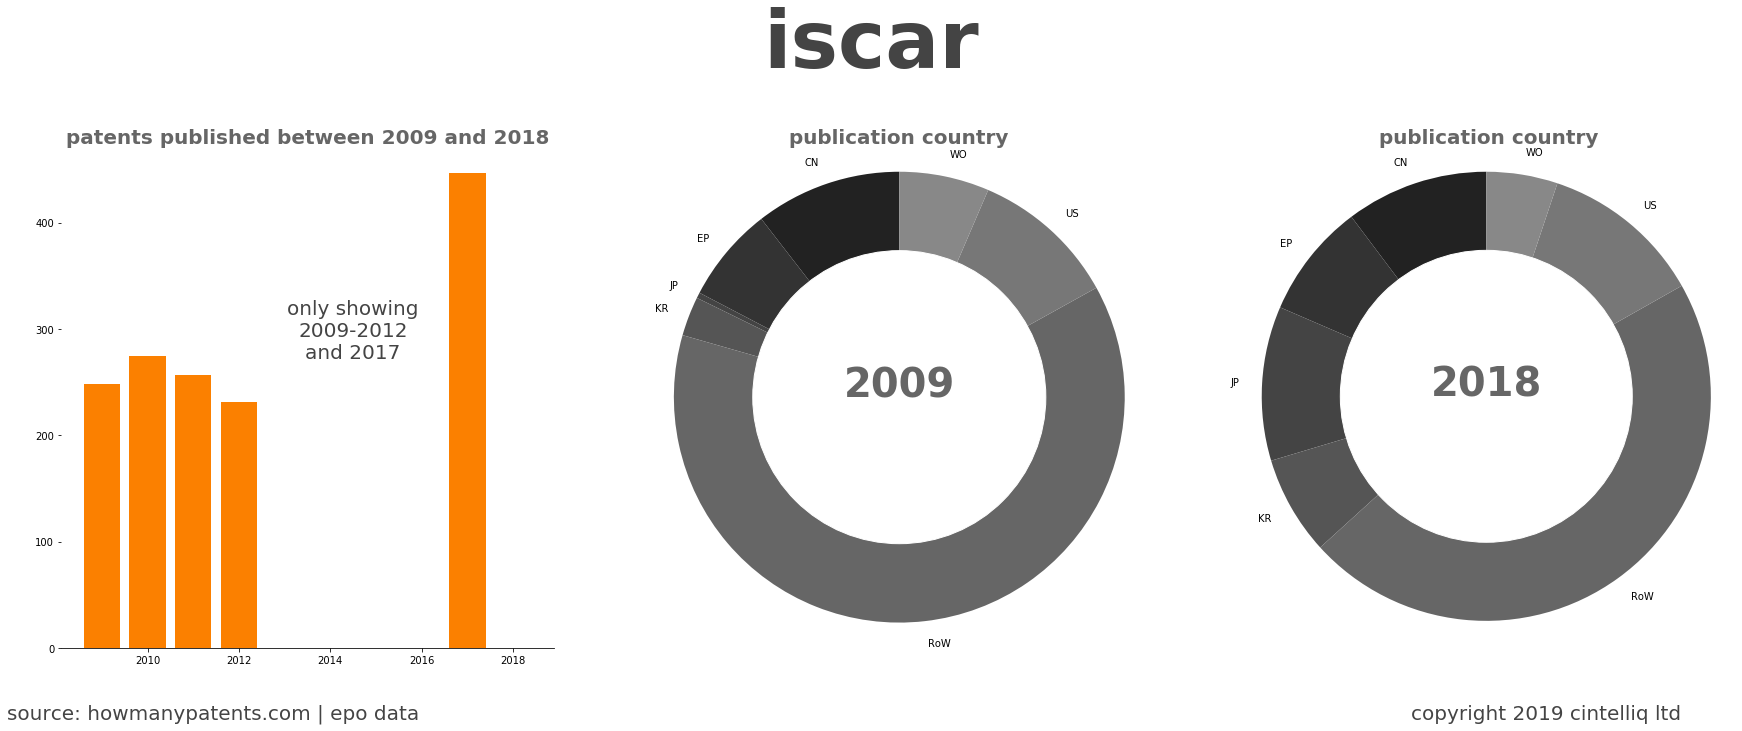 summary of patents for Iscar